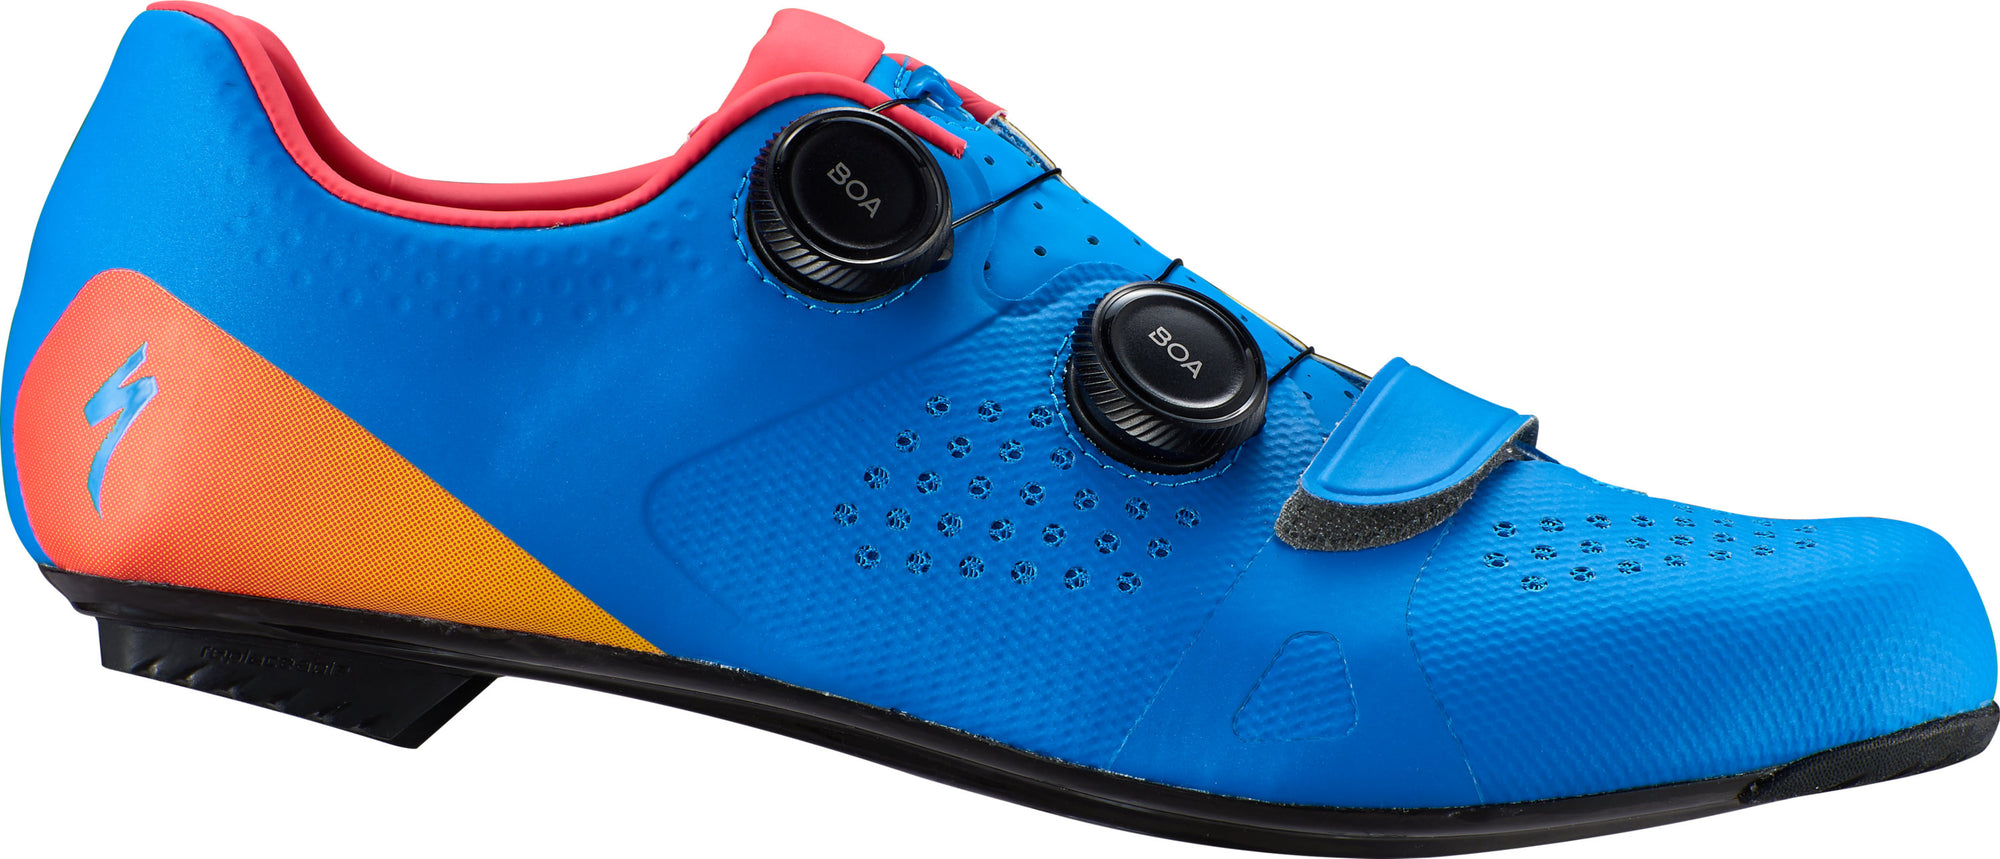 Specialized Torch Road Shoes | Specialized Taiwan